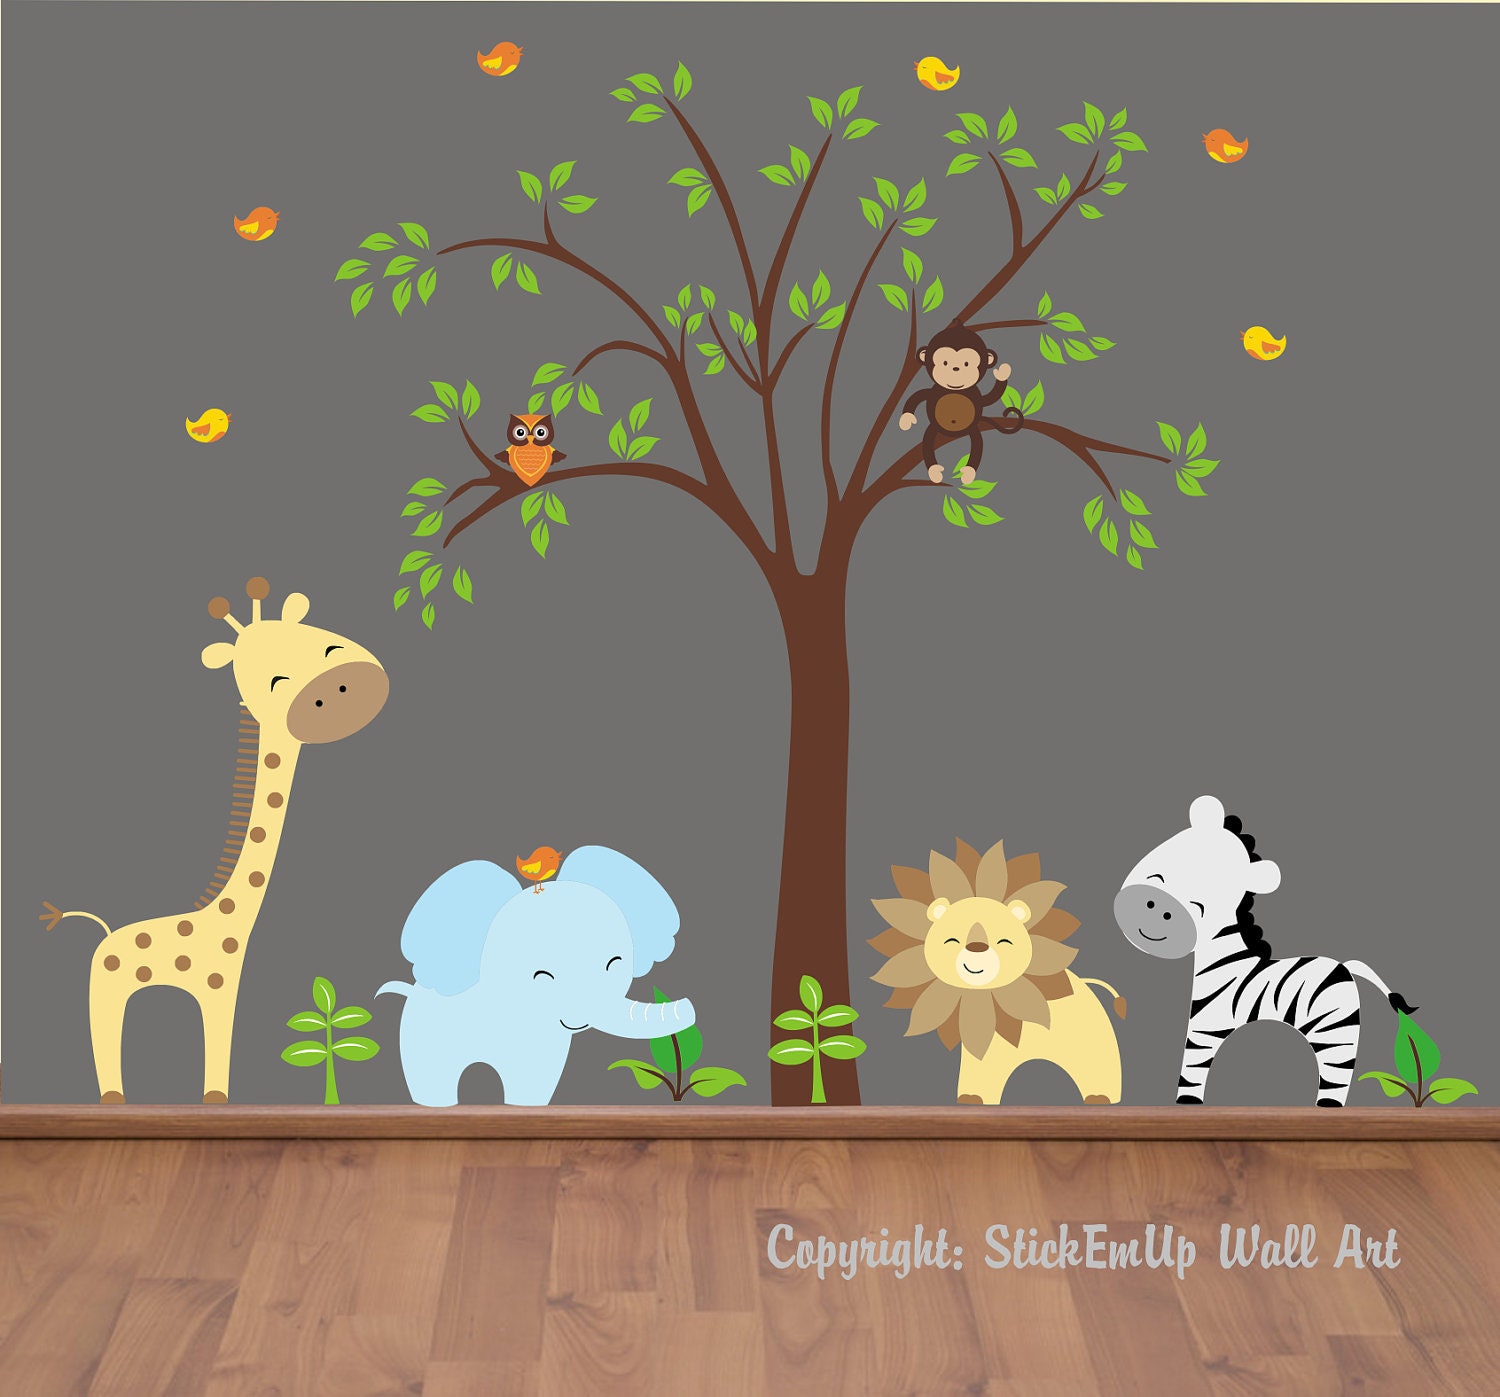 Popular items for baby wall decal on Etsy